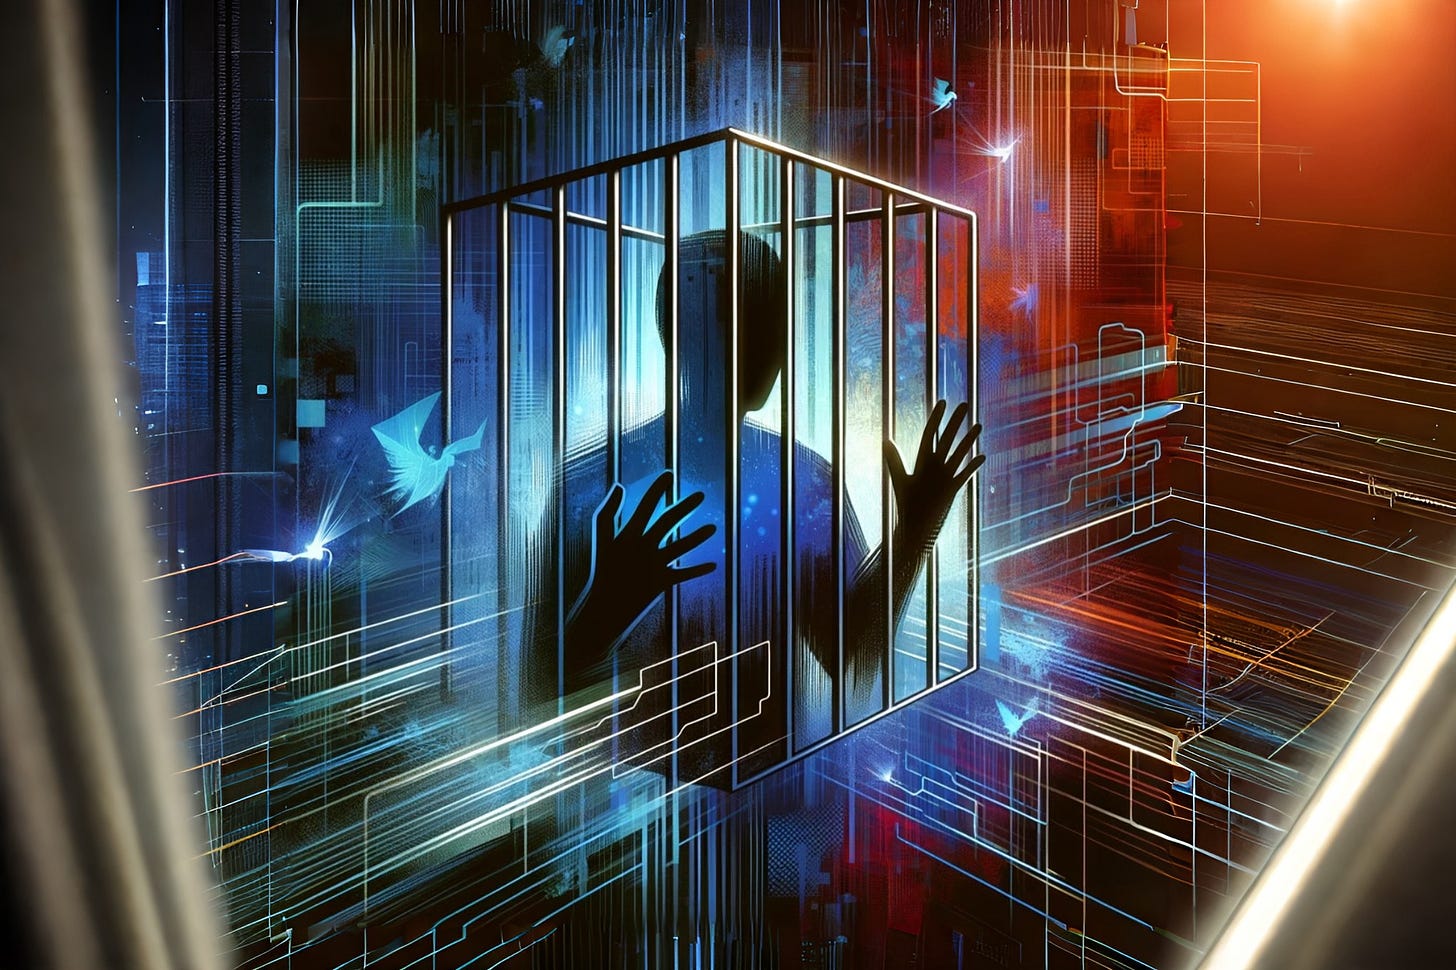 A silhouette of a man encased by a digital prison